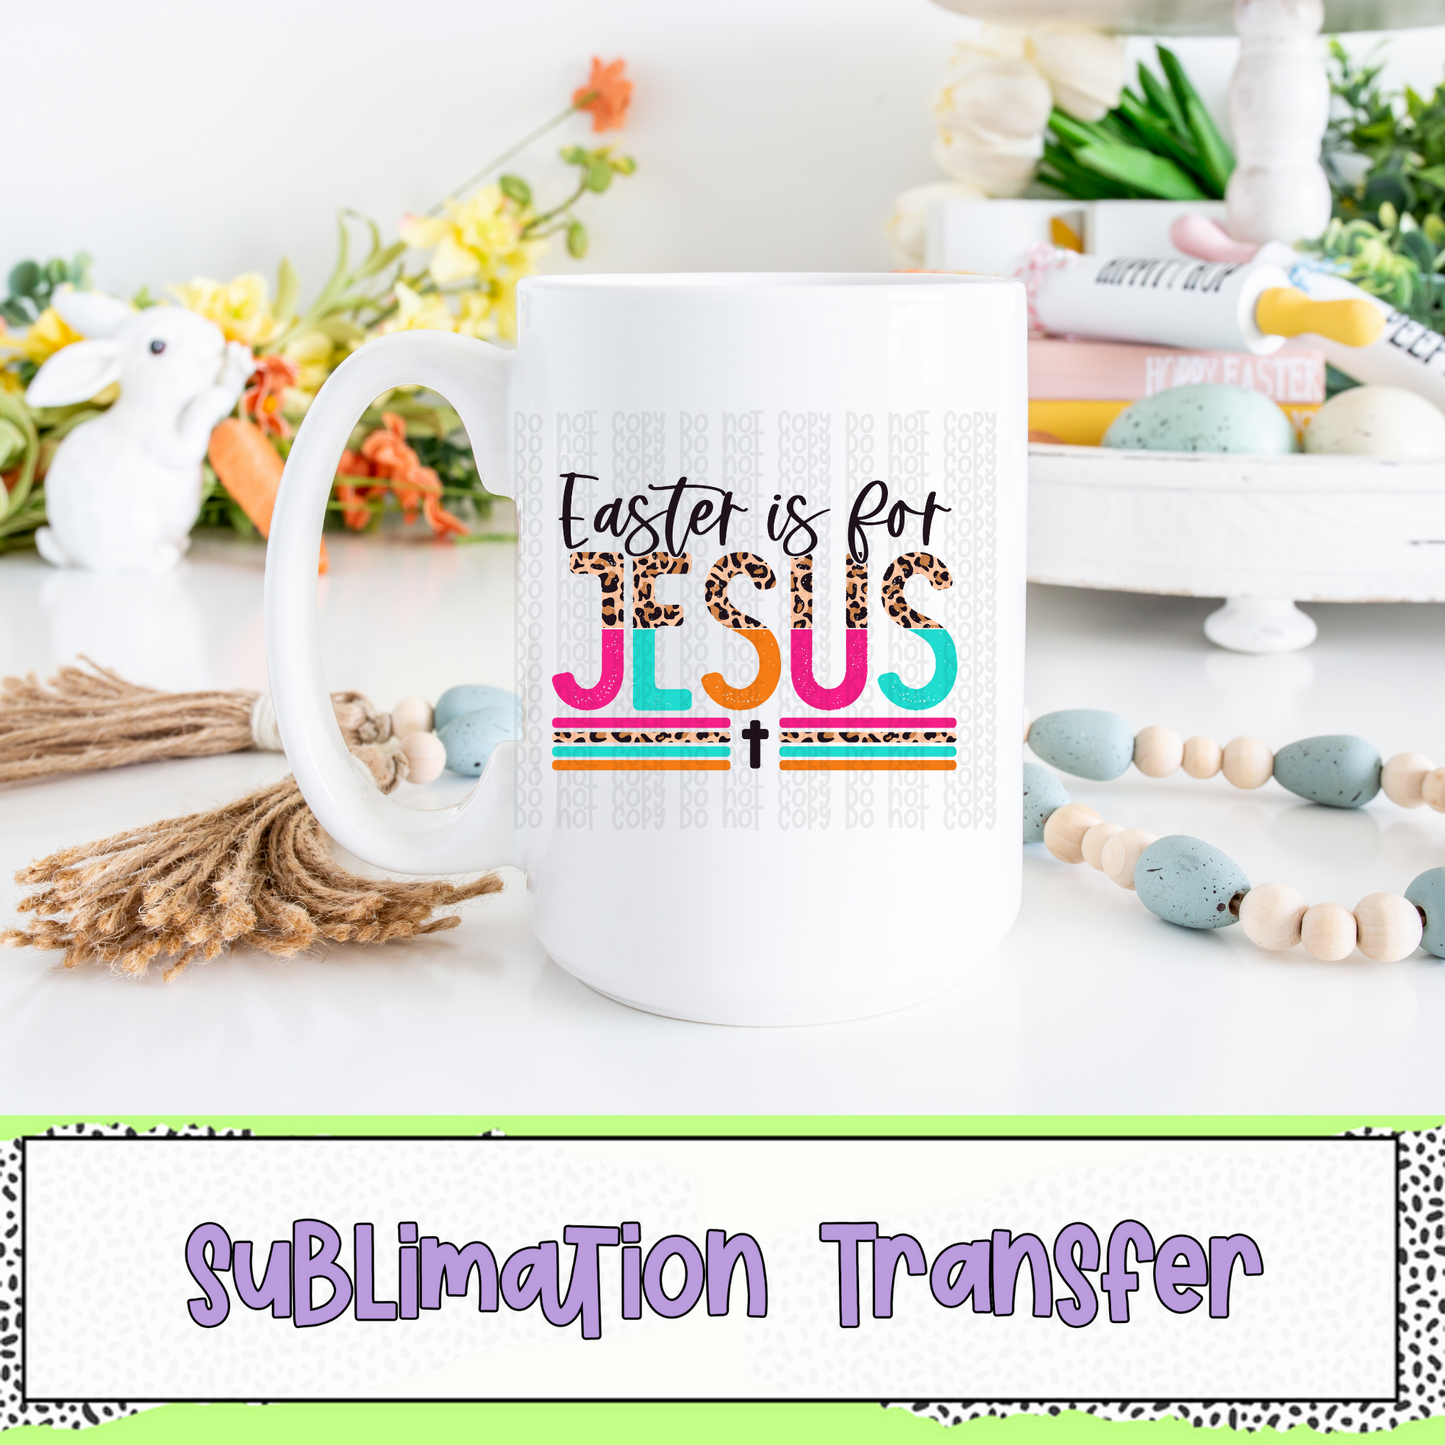 Easter is for Jesus - SUBLIMATION TRANSFER